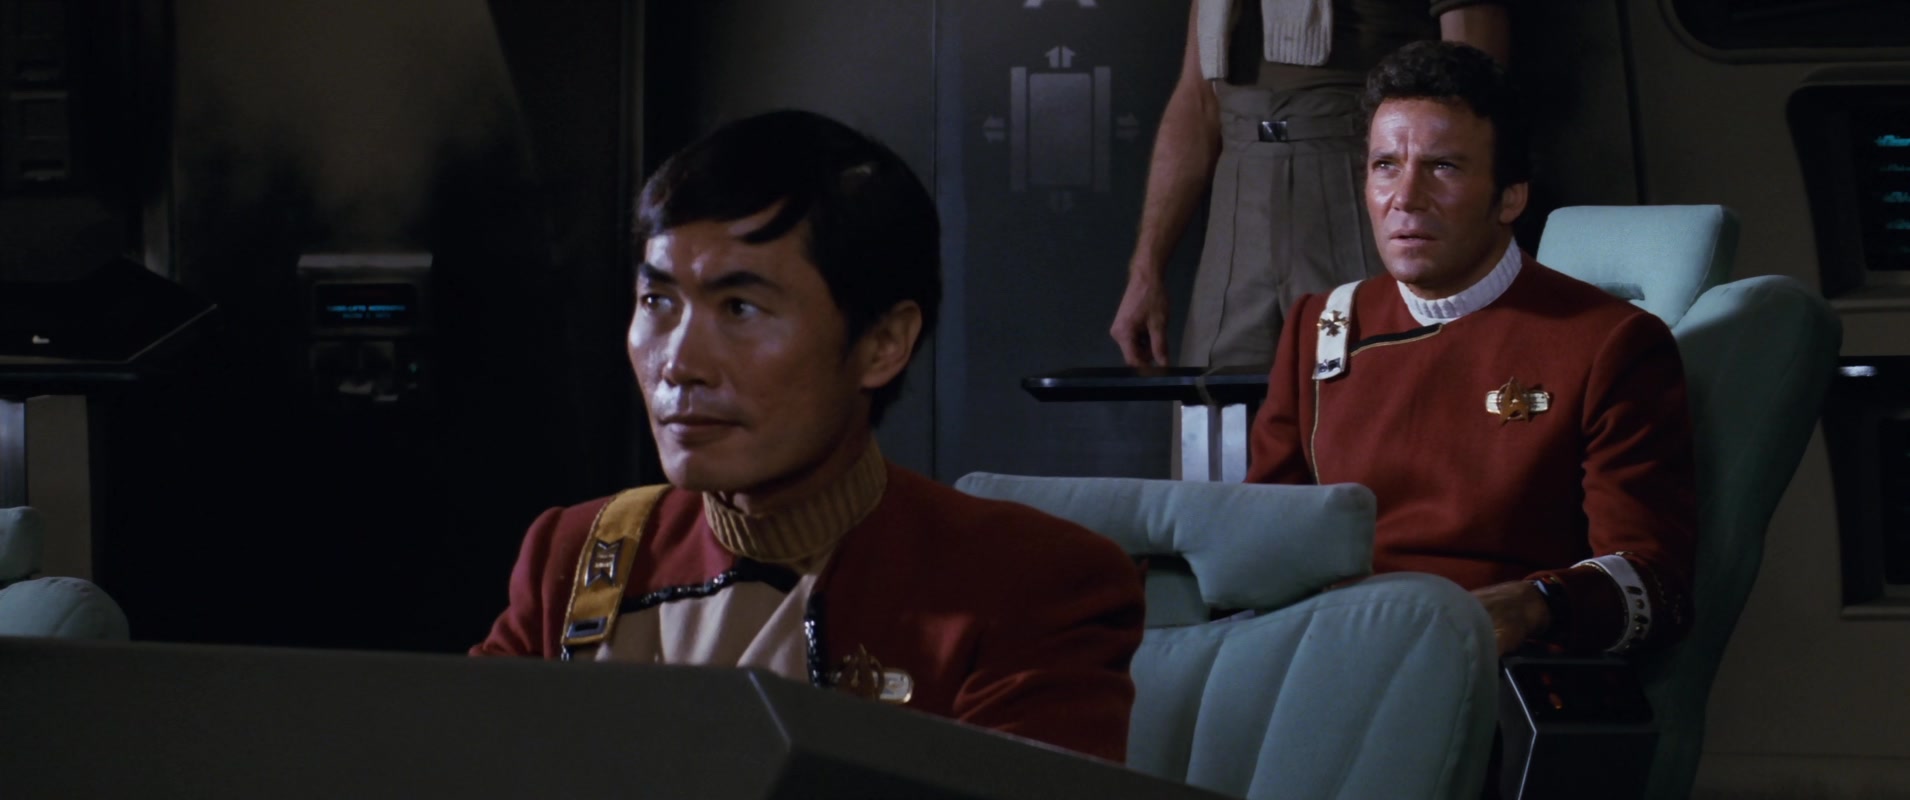 Kirk (William Shatner) and Sulu (George Takei) prepare to take the fight to Khan (Ricardo Montalbán) in Star Trek II: The Wrath of Khan (1982), Paramount Pictures via Blu-ray